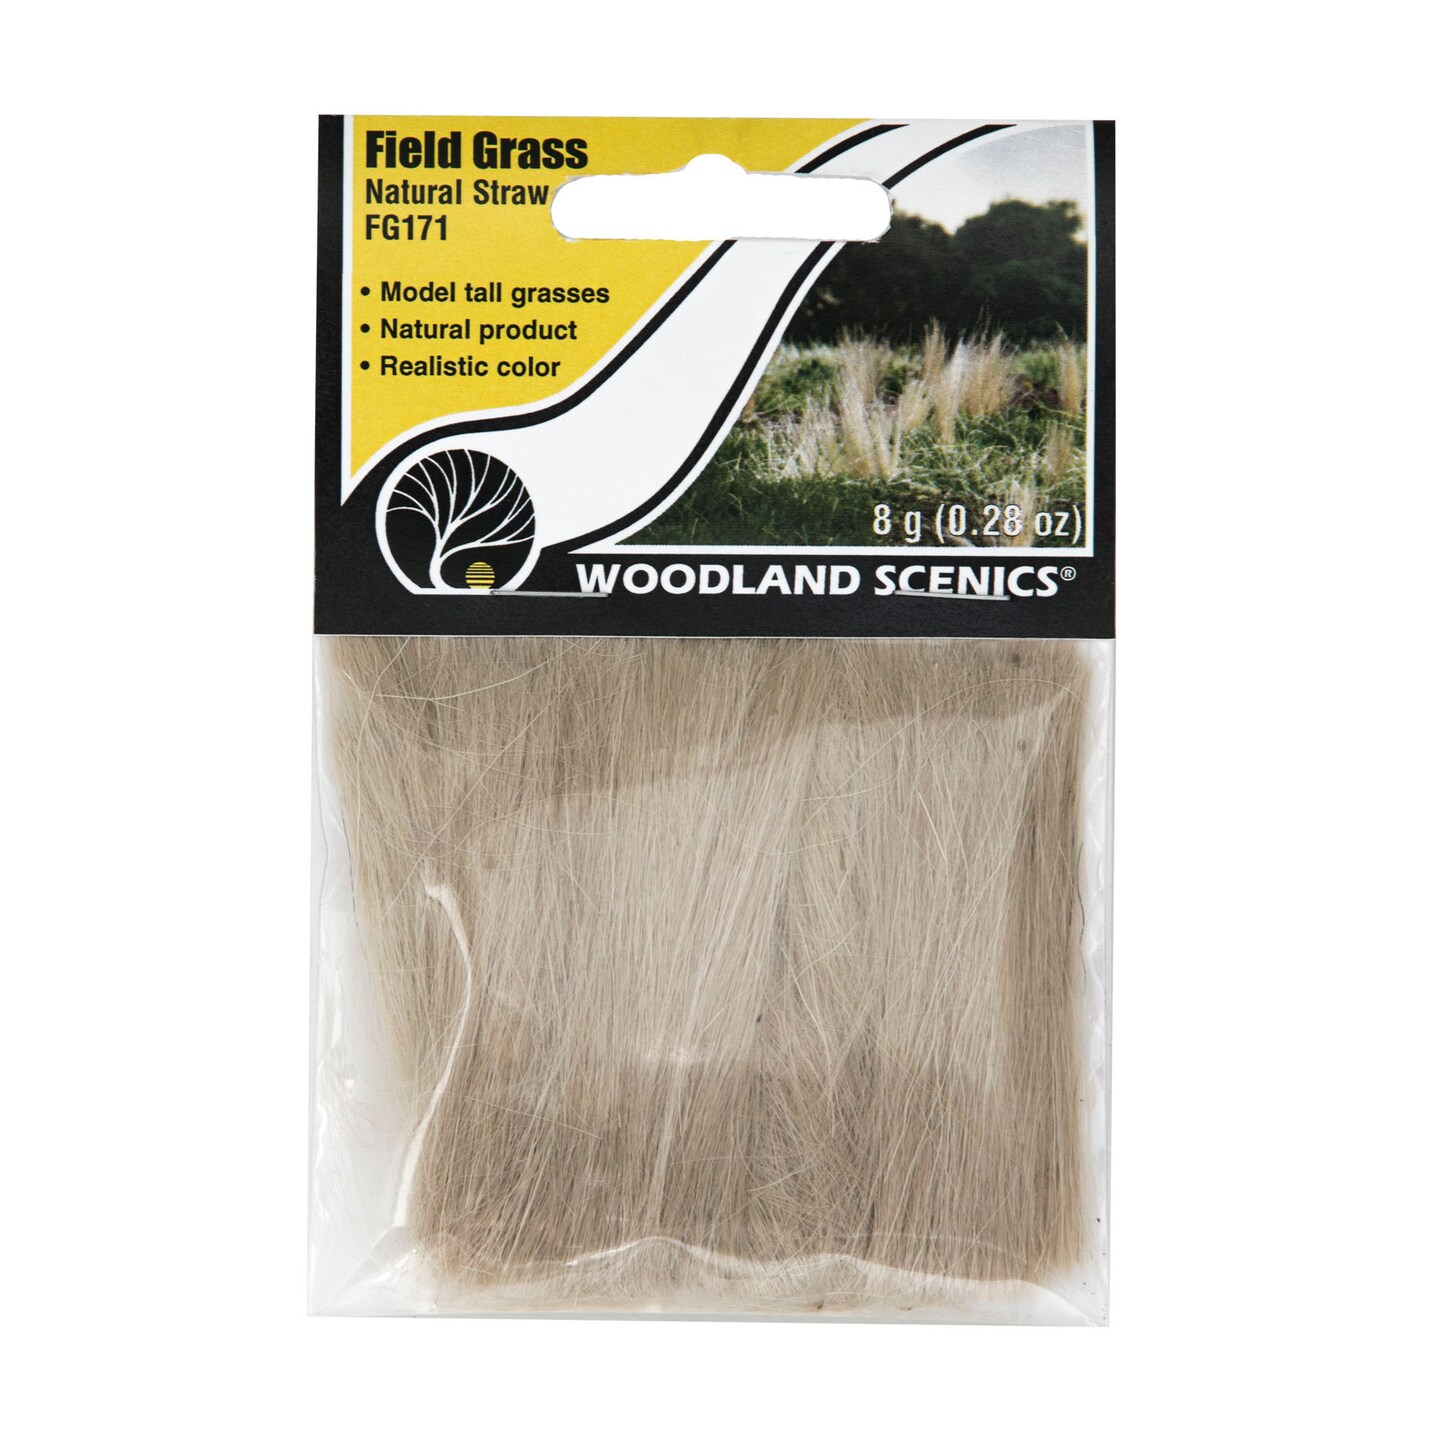 Woodland Scenics Field Grass Groundcover, Natural Straw